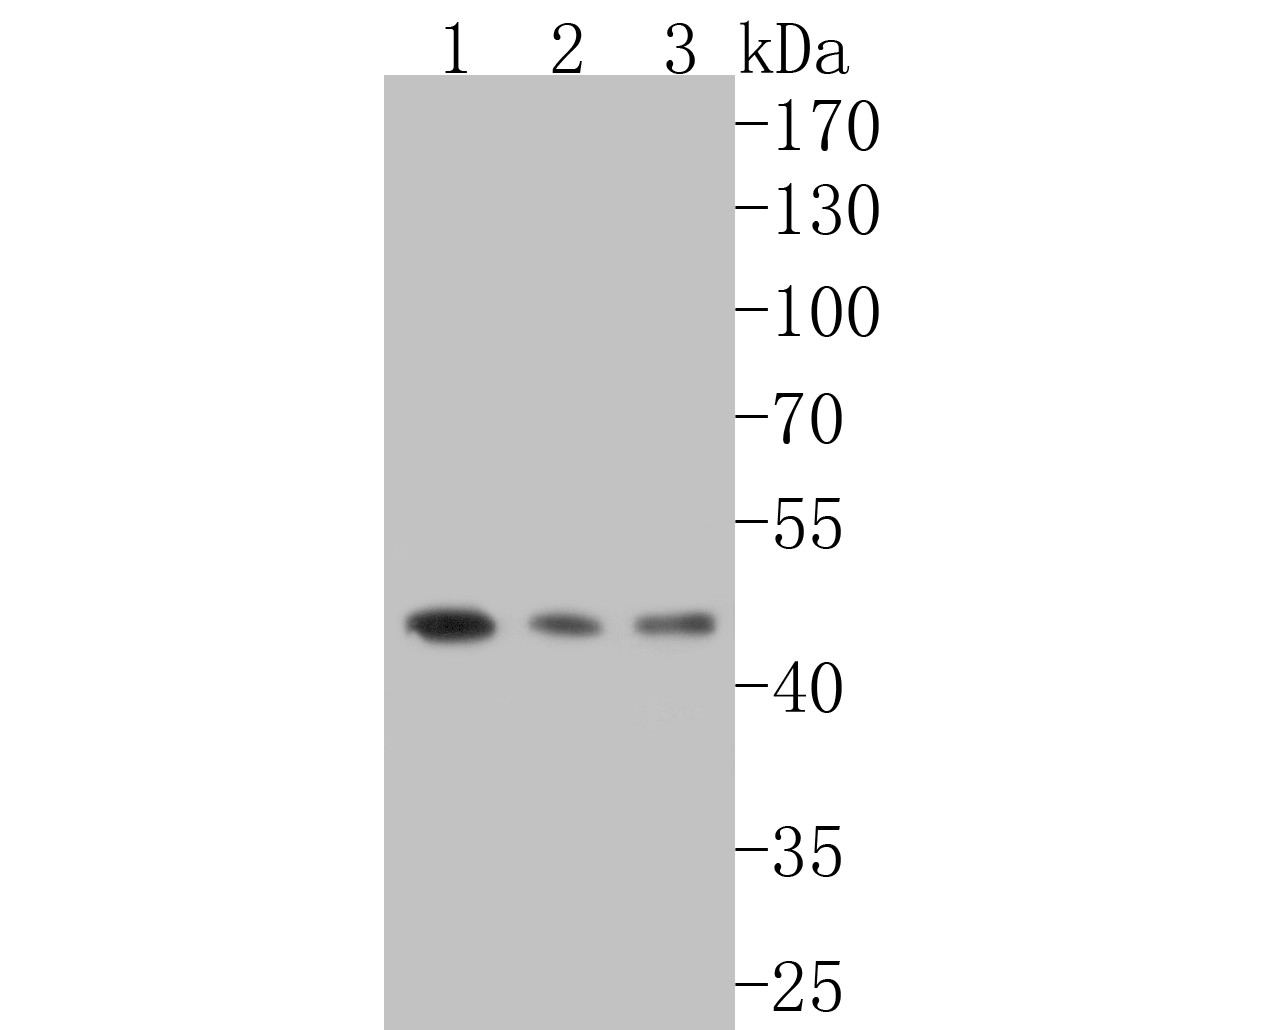 Western blot analysis of DP1 on different lysates. Proteins were transferred to a PVDF membrane and blocked with 5% BSA in PBS for 1 hour at room temperature. The primary antibody (ET7110-43, 1/500) was used in 5% BSA at room temperature for 2 hours. Goat Anti-Rabbit IgG - HRP Secondary Antibody (HA1001) at 1:200,000 dilution was used for 1 hour at room temperature.<br />
Positive control: <br />
Lane 1: SiHa cell lysate<br />
Lane 2: SH-SY5Y cell lysate<br />
Lane 3: Mouse thymus tissue lysate